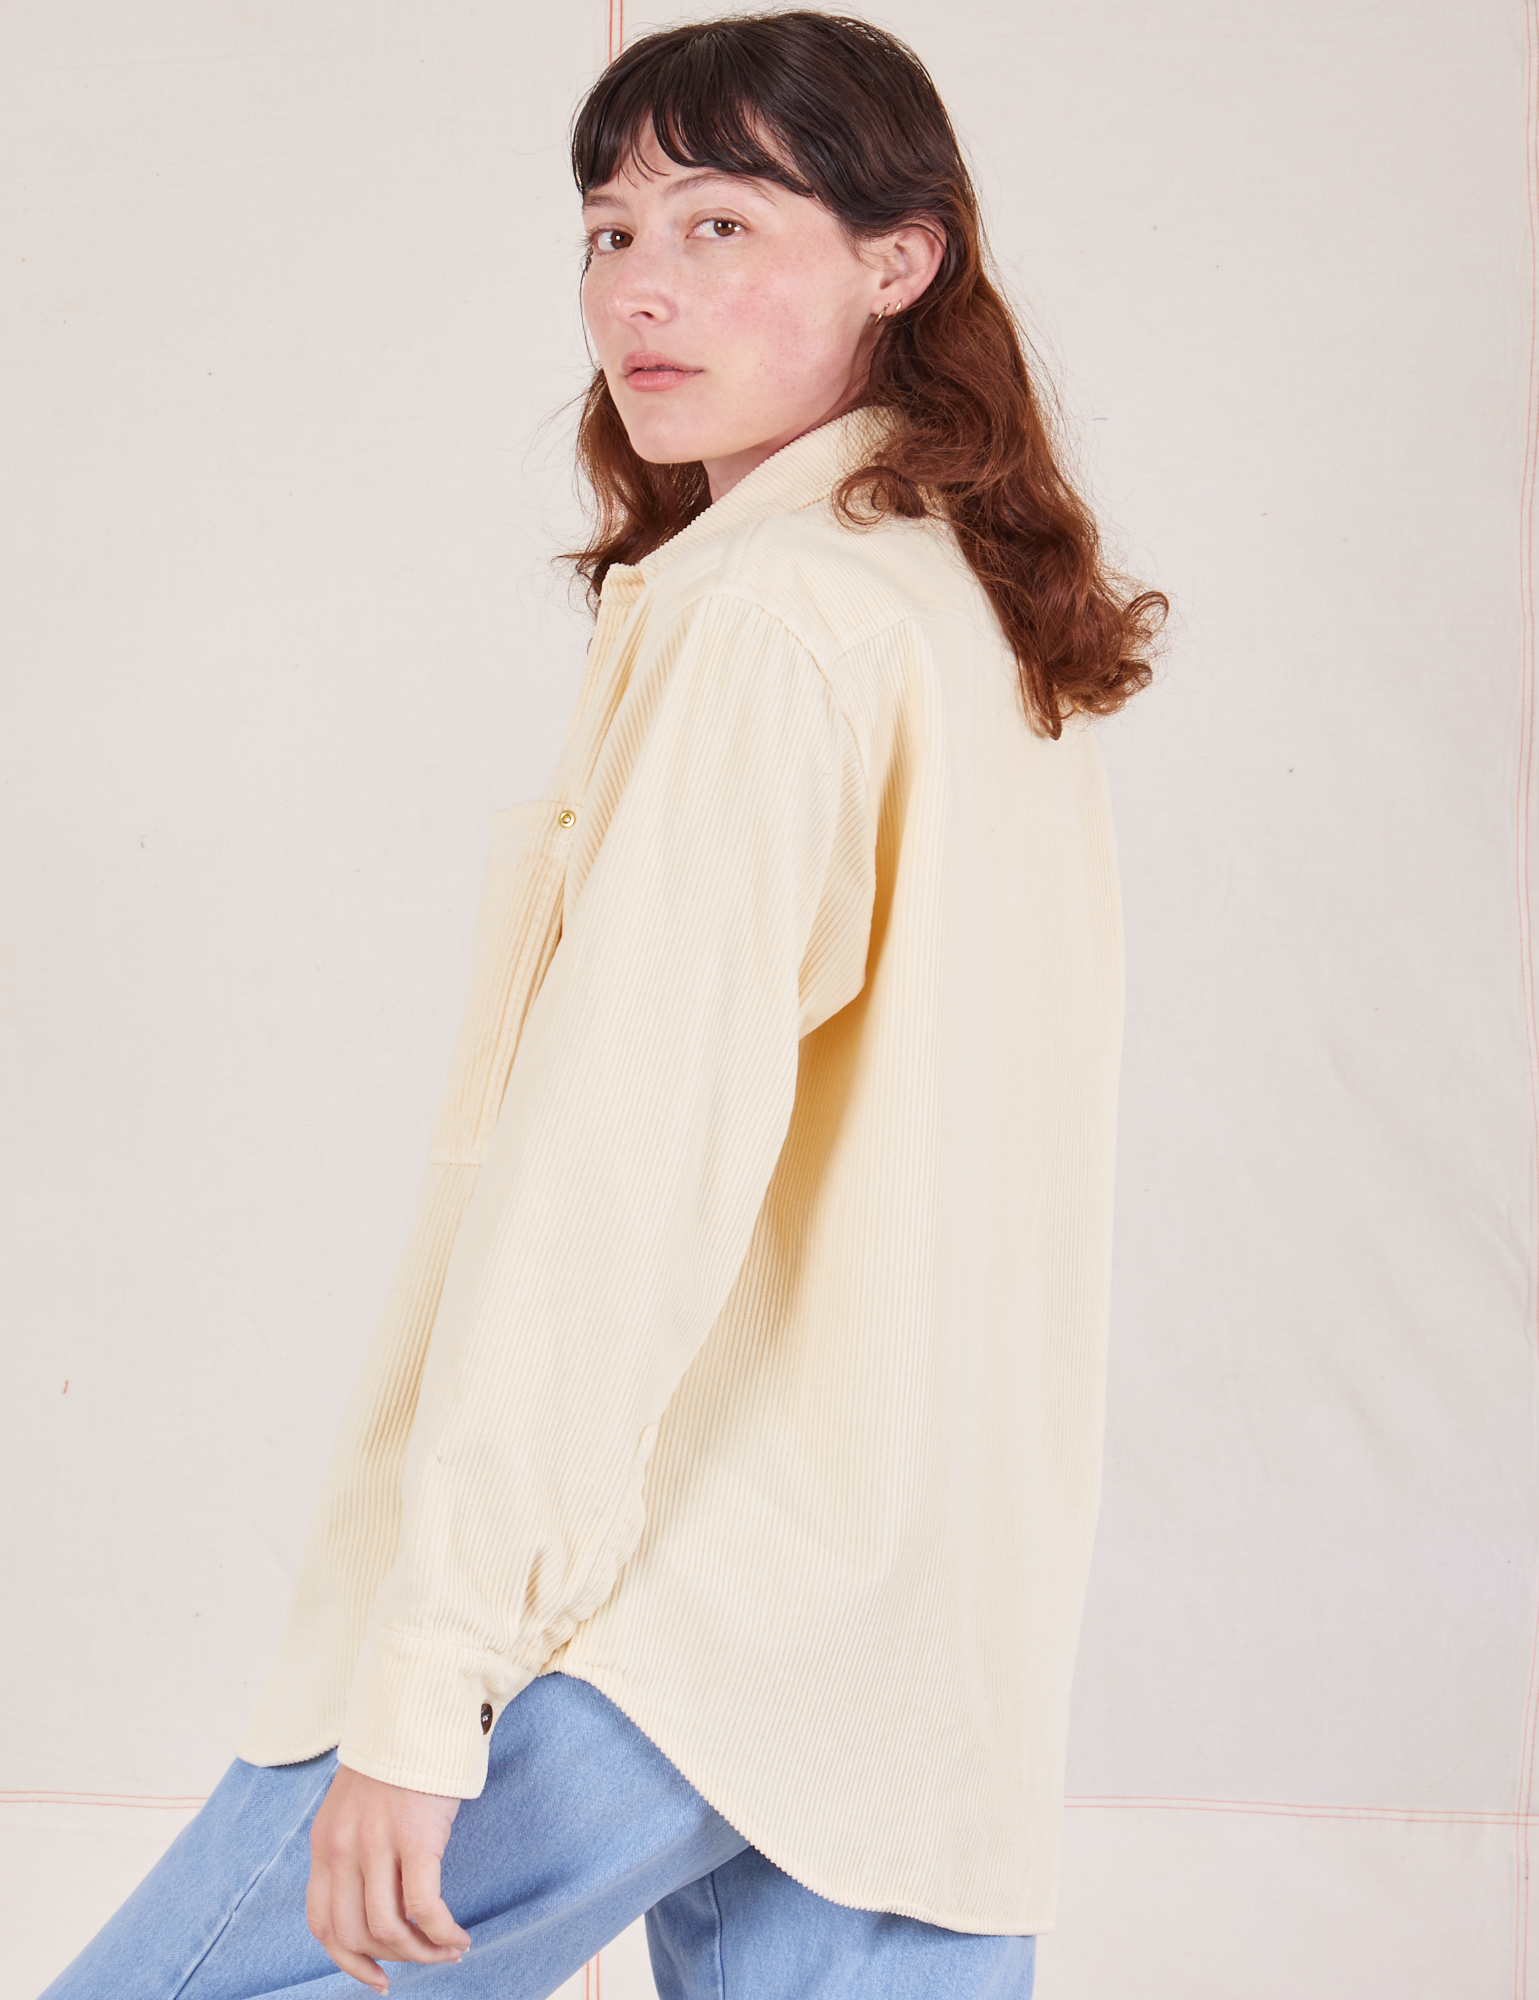 Corduroy Overshirt in Vintage Off-White side view on Alex